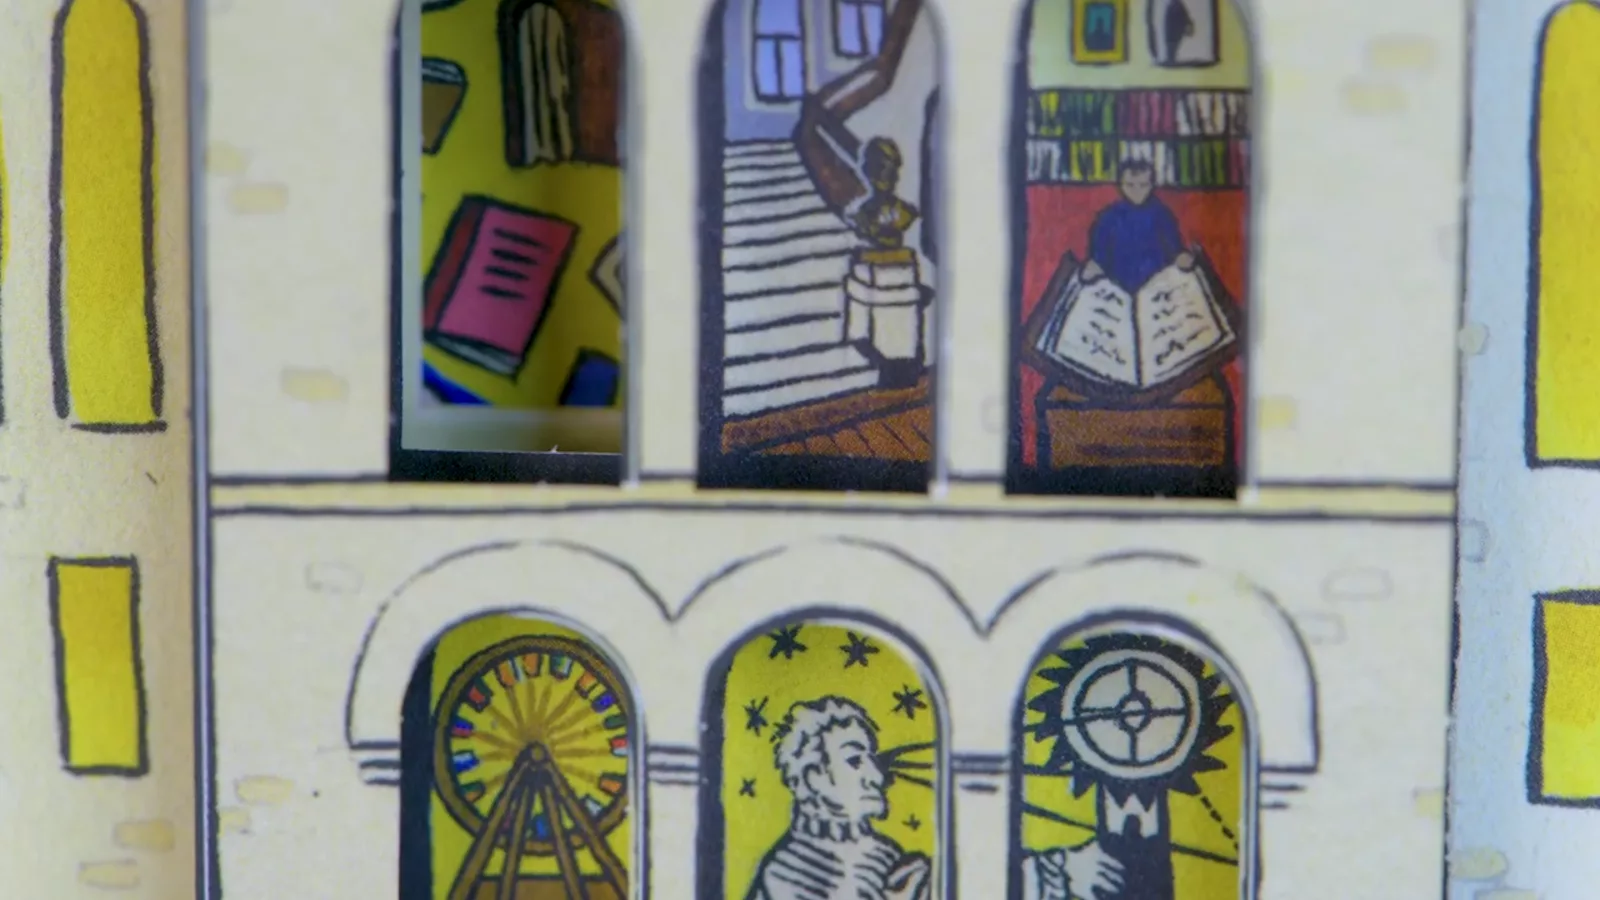 Detail of the pop-up Newberry. Inside the windows are different illustrations, like a cascade of books, a researcher opening a giant book, and the main staircase in the library’s lobby.